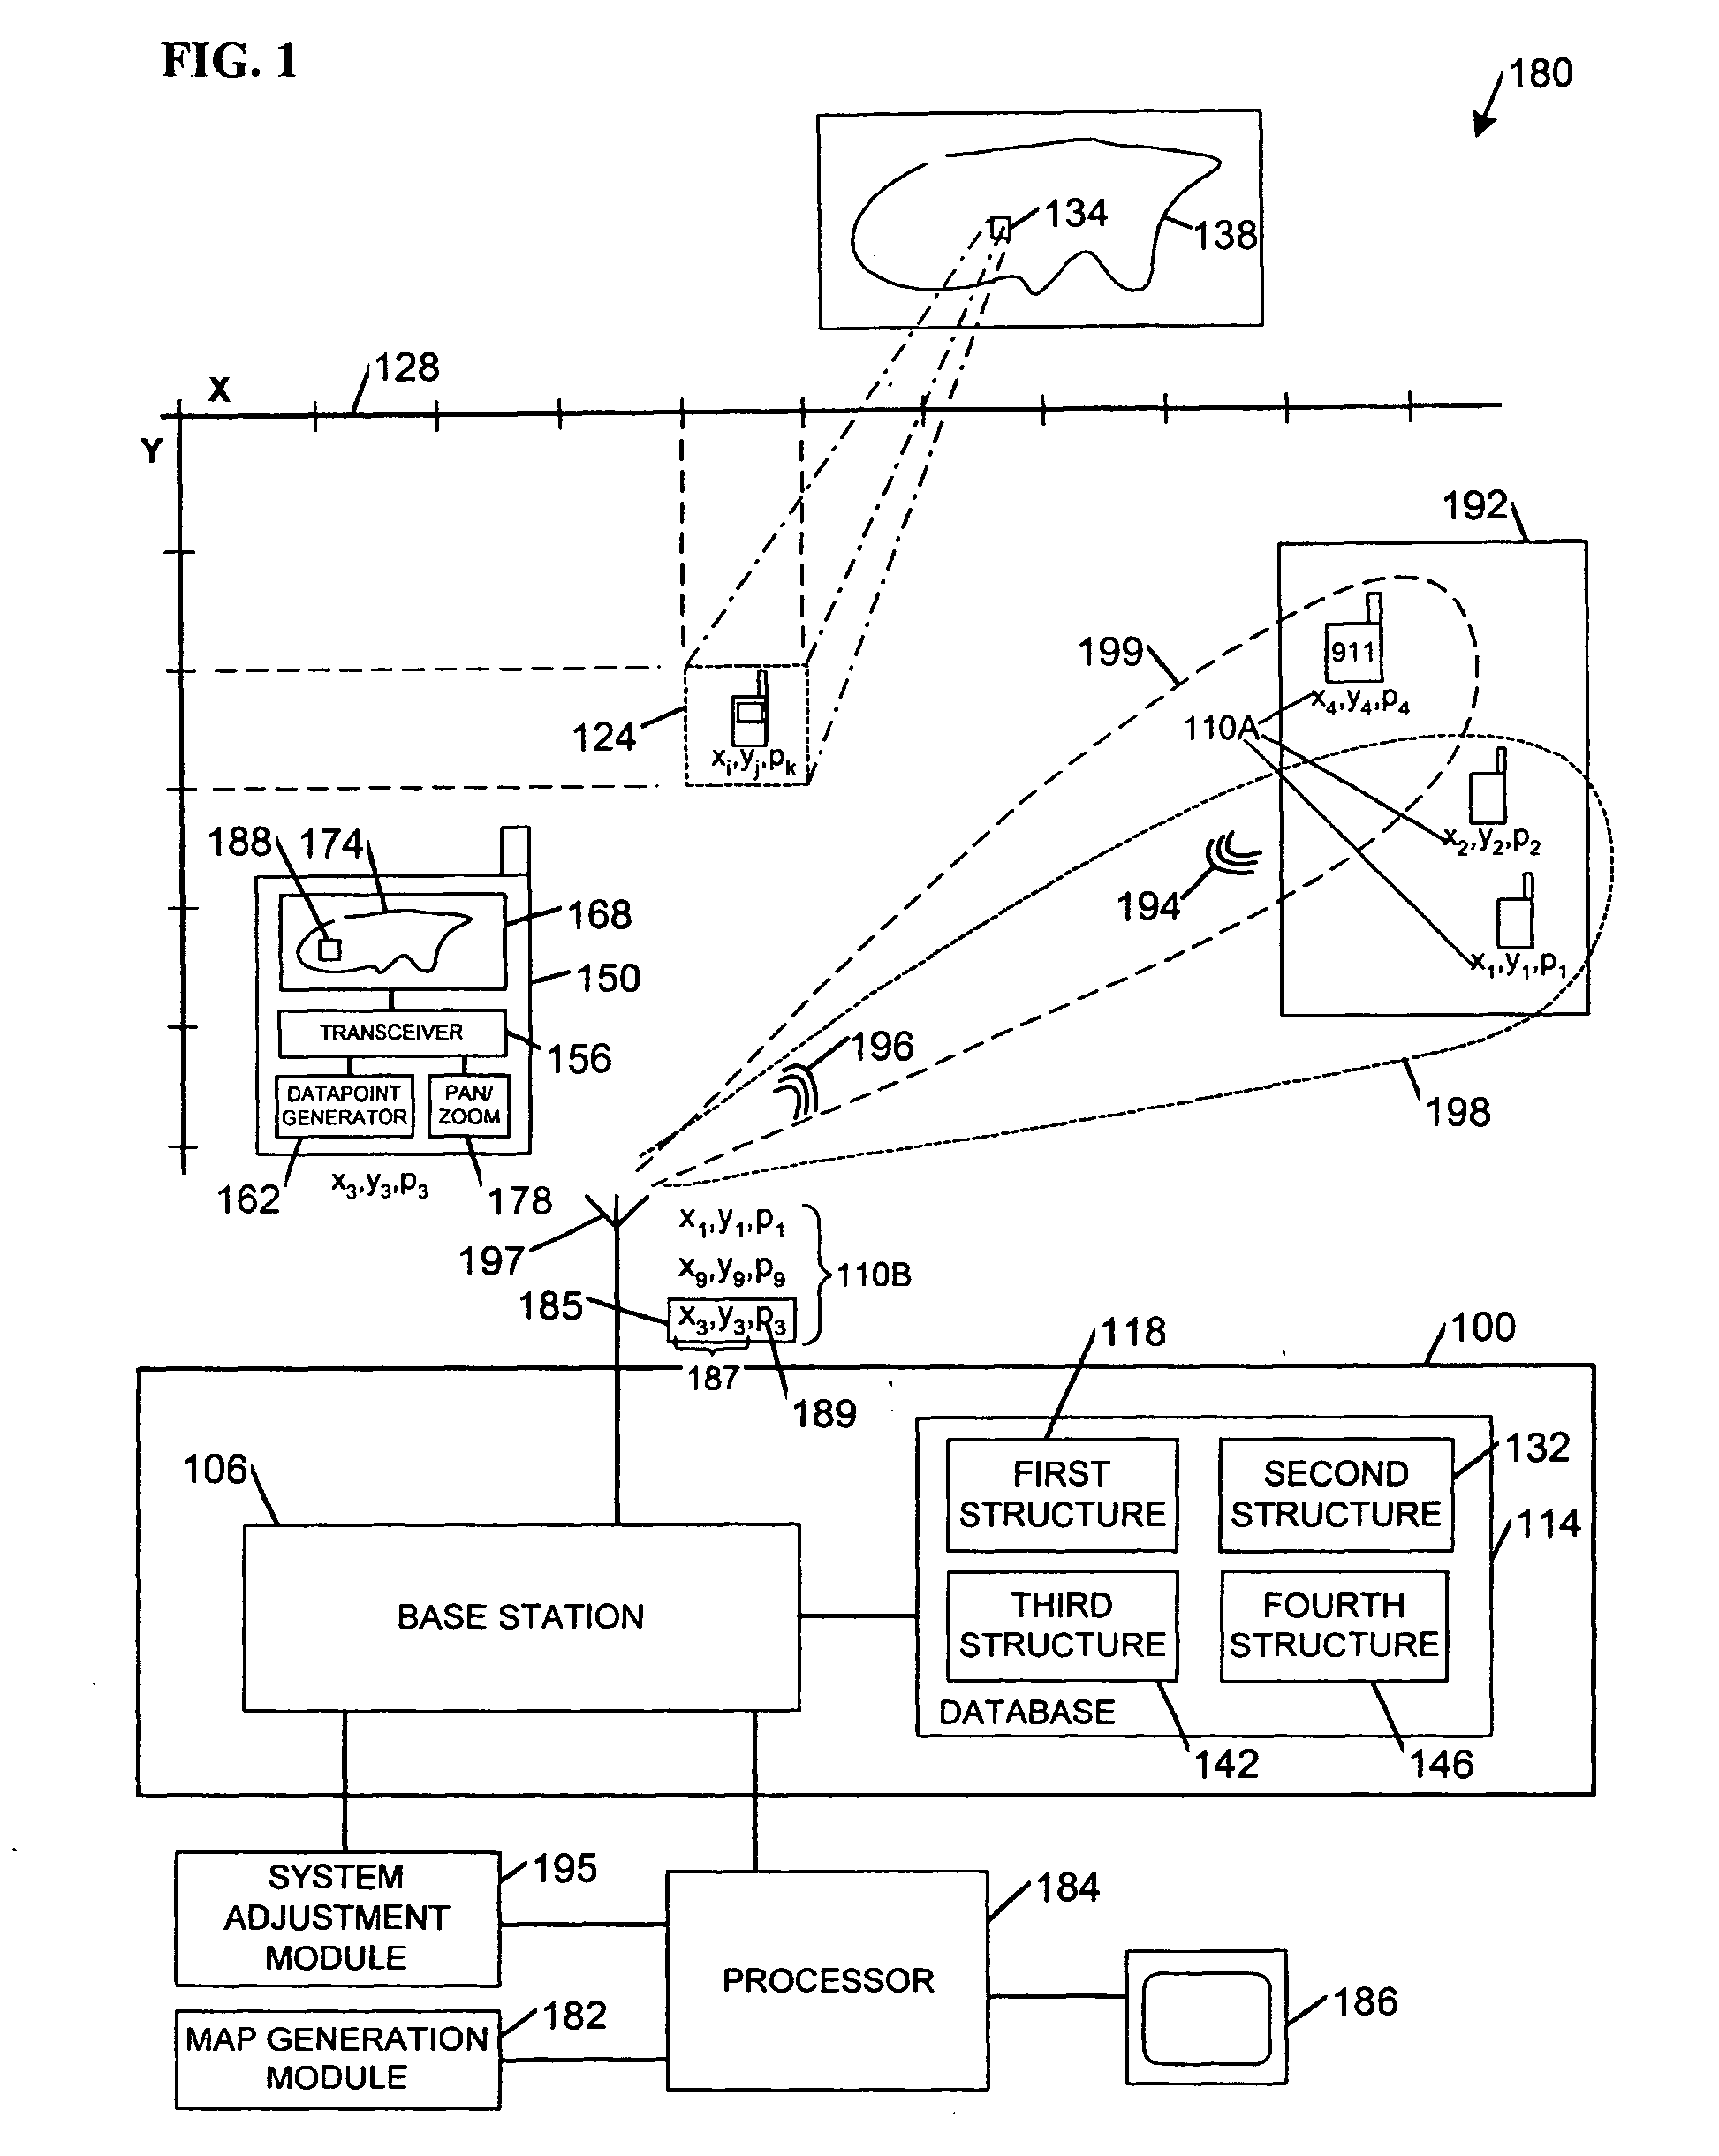 Wireless communication mapping apparatus, systems, and methods